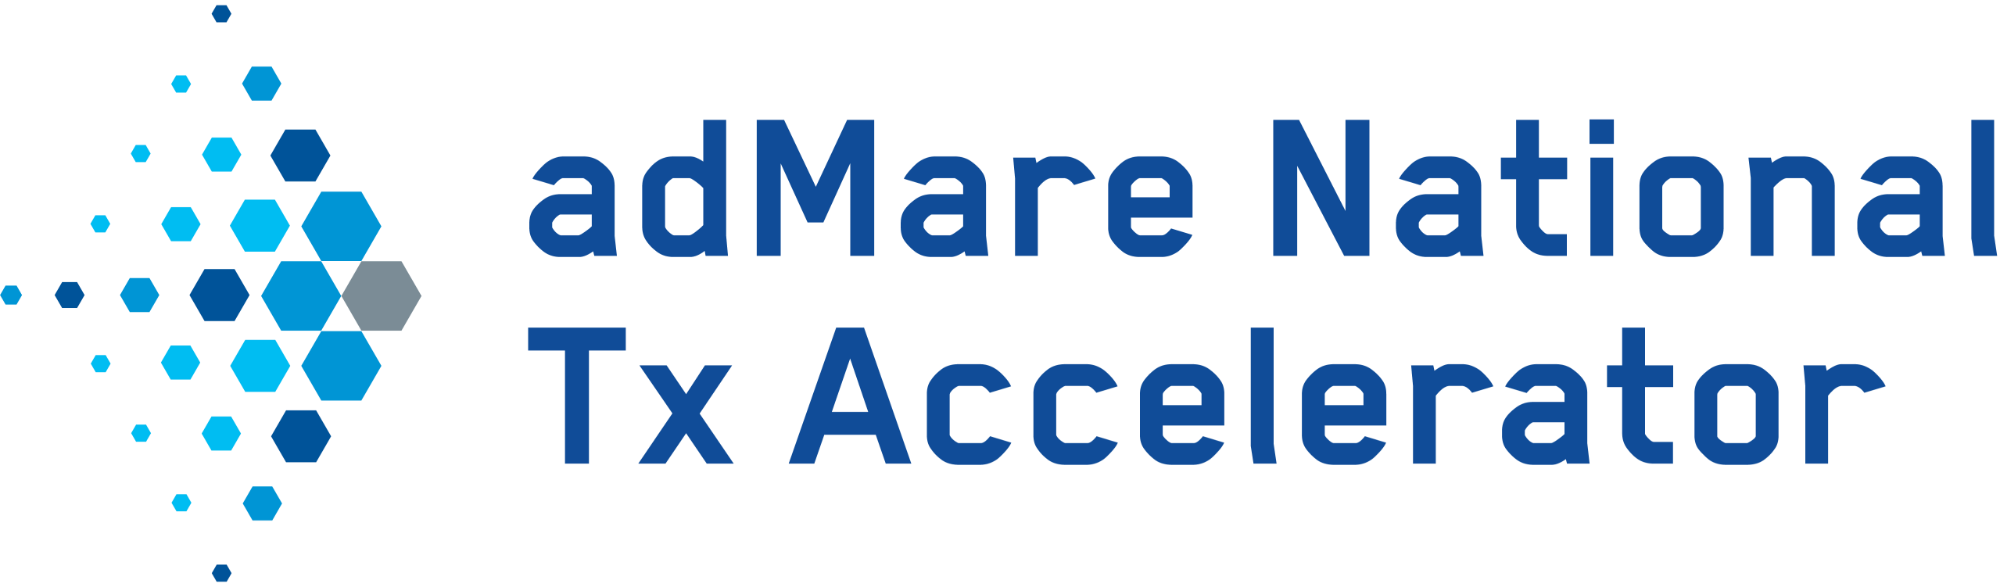 adMare National Tx Accelerator: Advancing the growth of your early-stage therapeutics venture in Canada.